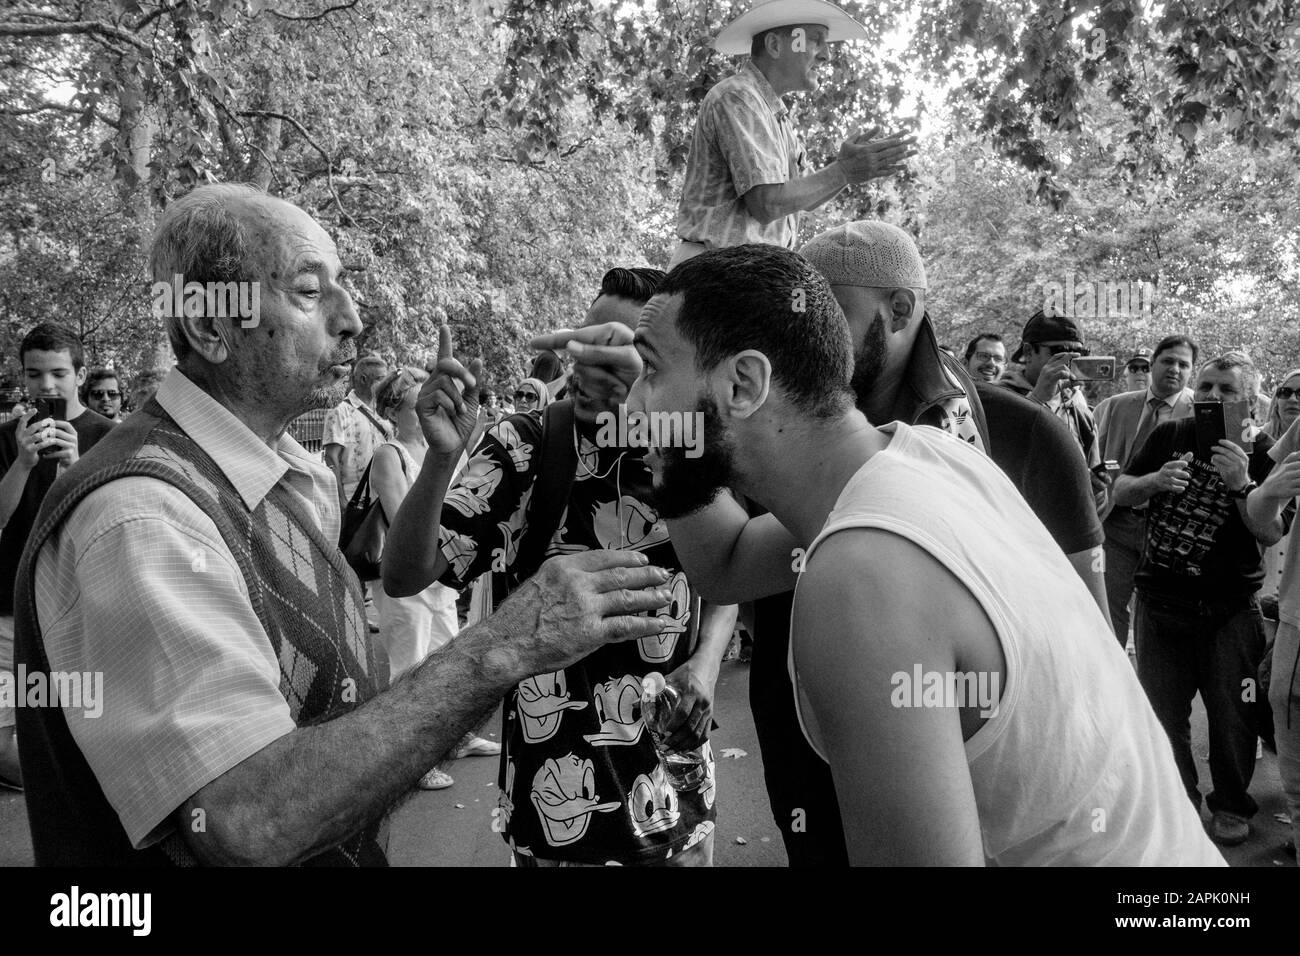 London black and white street photography: Three youths and an elderly man engage in heated debate, Speakers' Corner, Hyde Park, London, UK Stock Photo